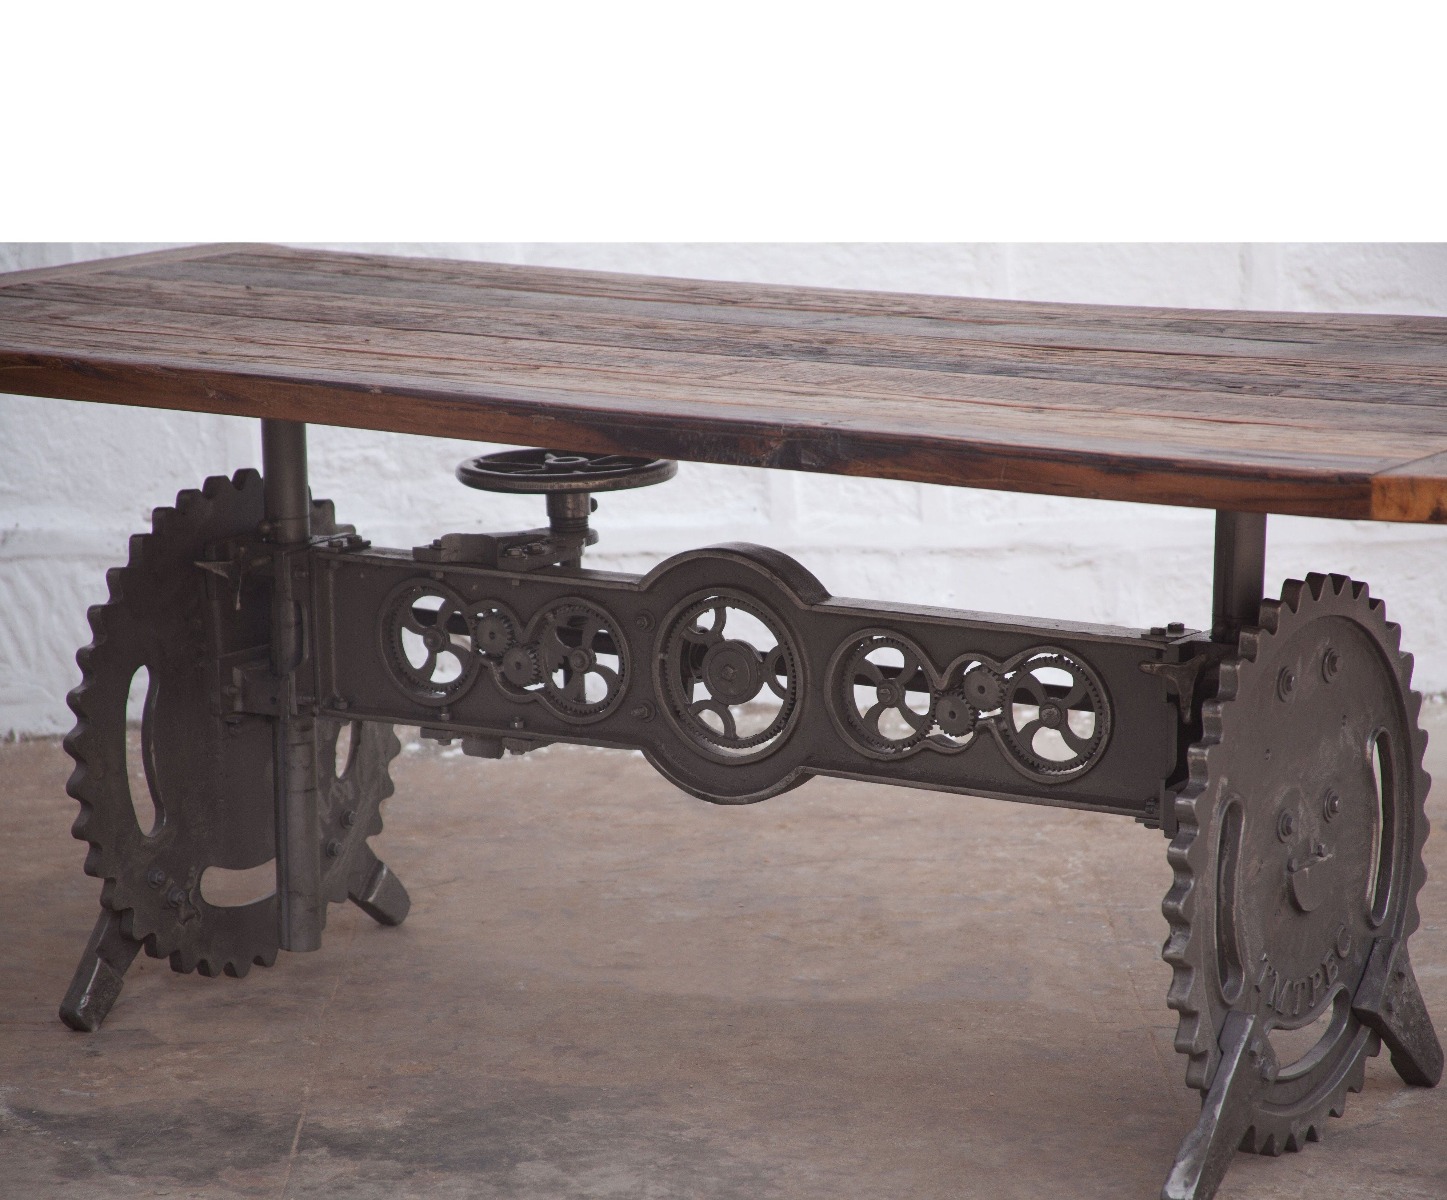 The Welles Industrial Crank Table